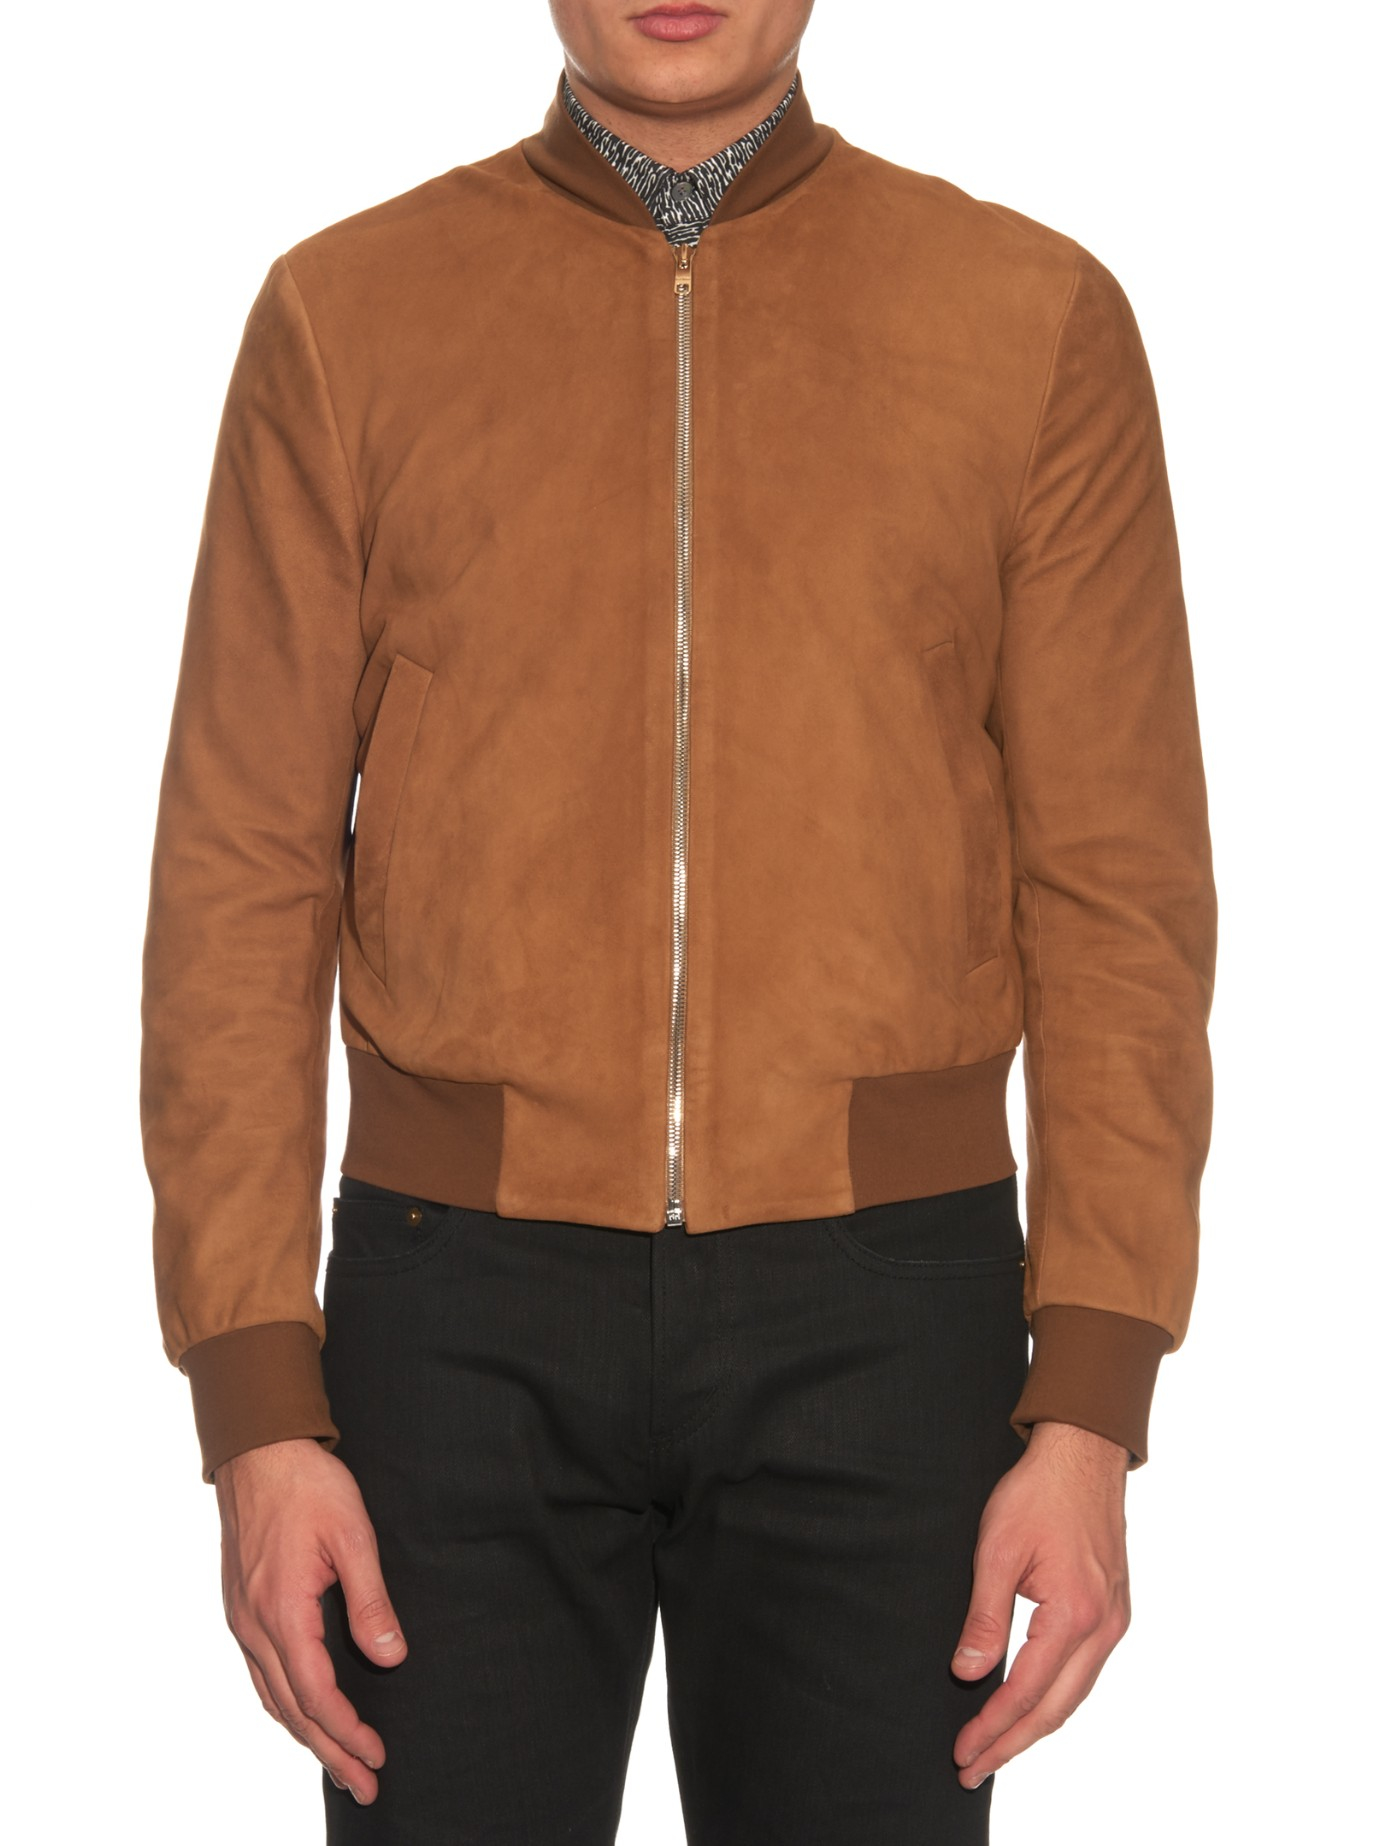 Paul Smith Suede Bomber Jacket in Tan (Brown) for Men | Lyst